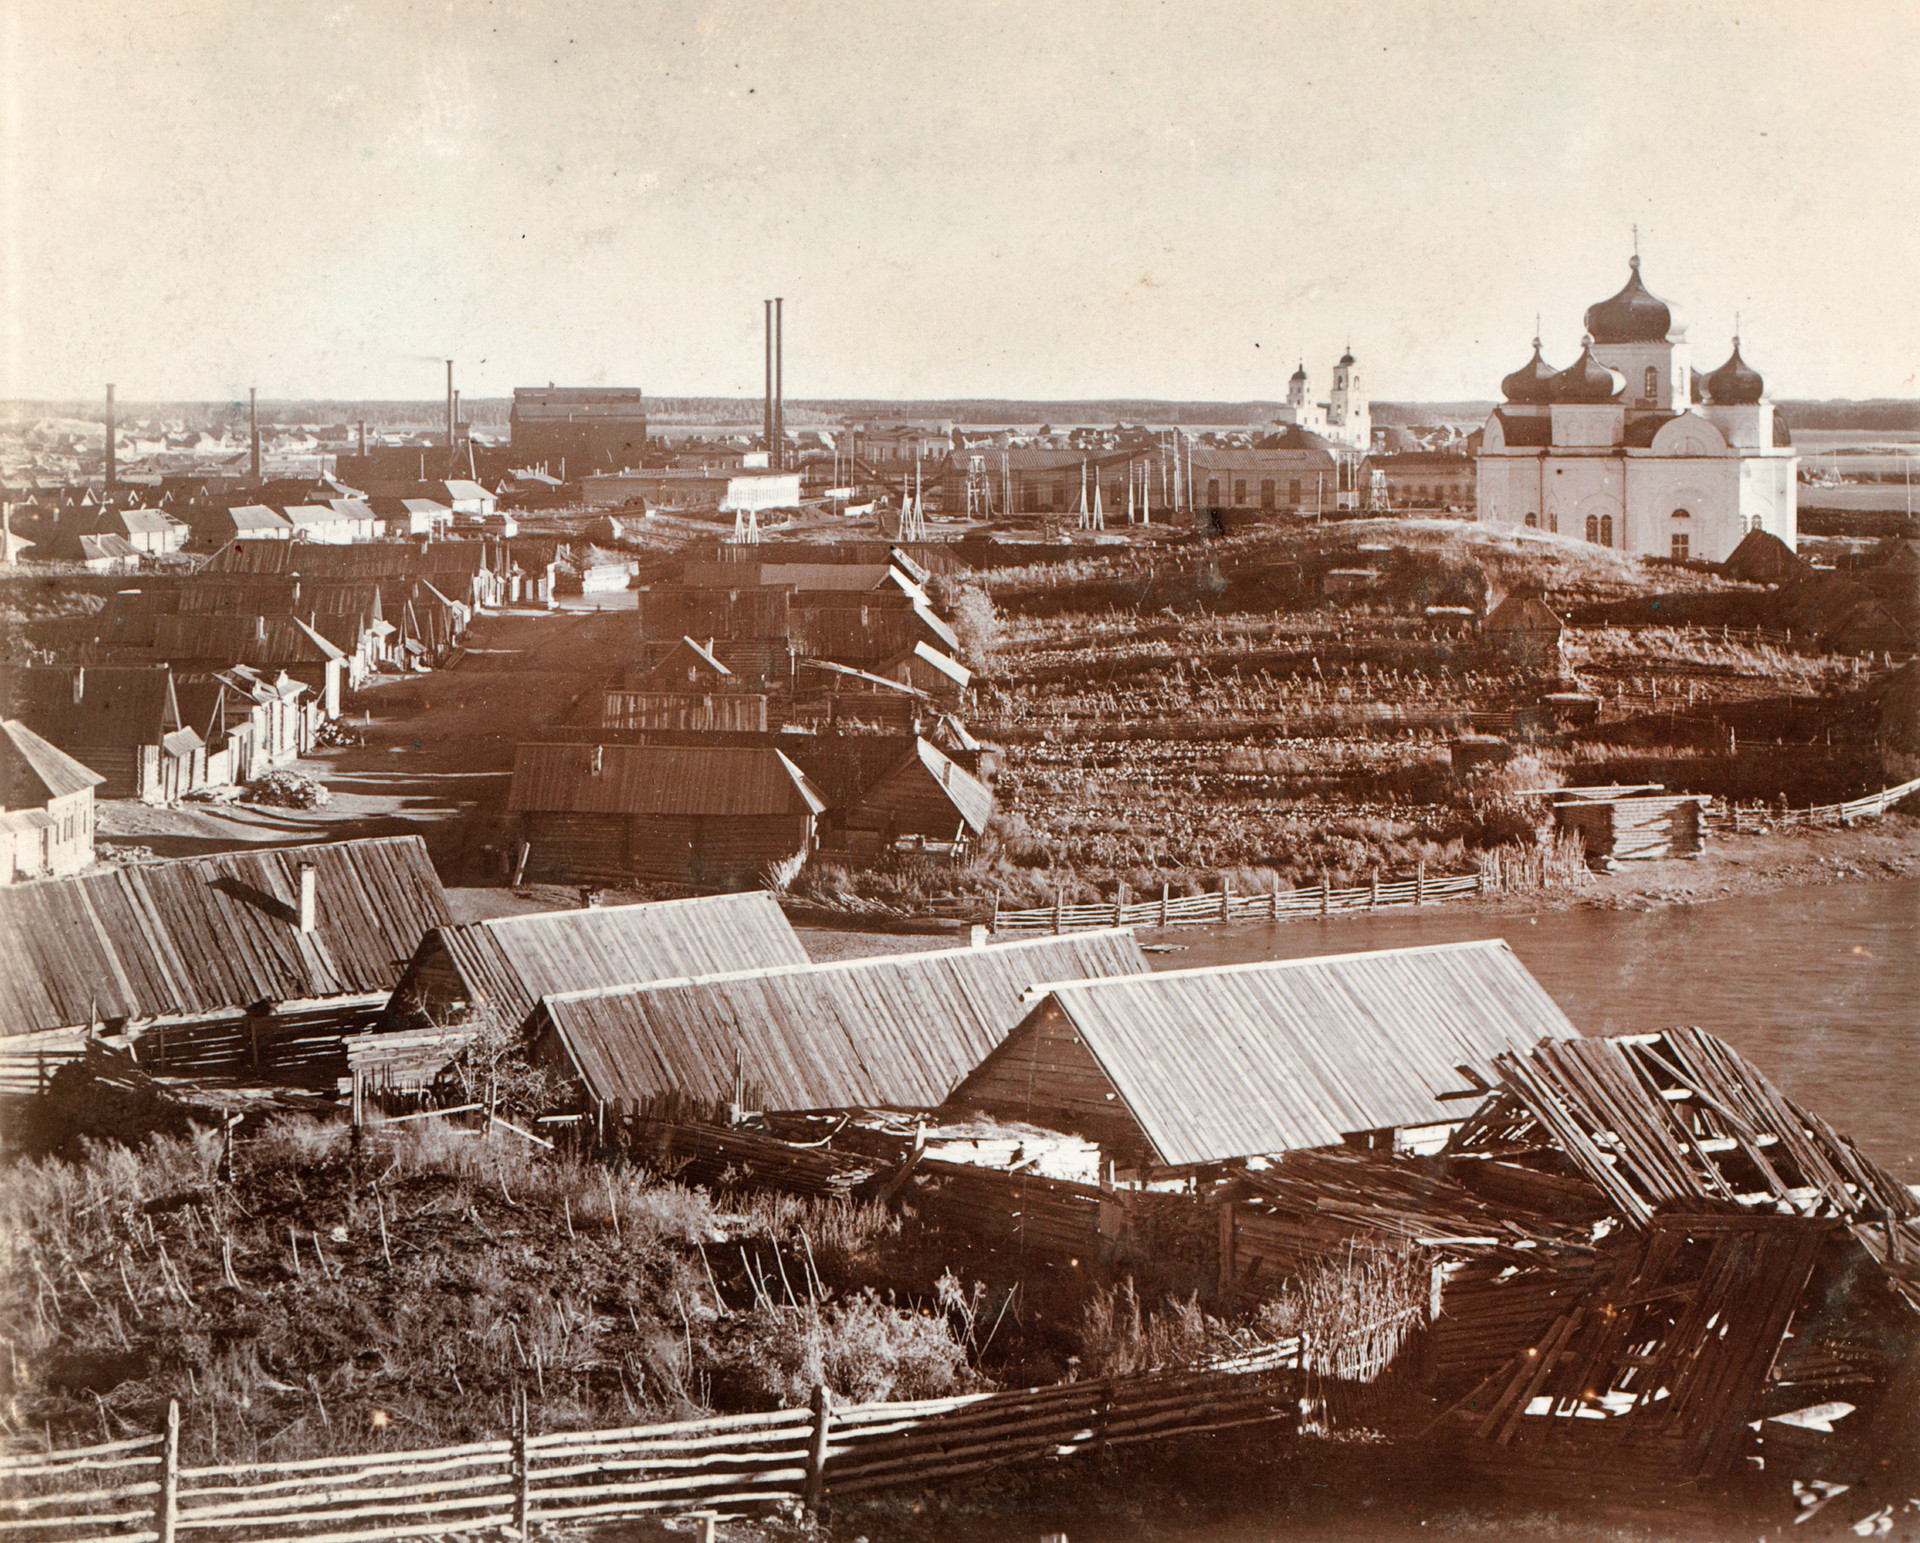 View of workers' houses & garden plots. Background: Kyshtym factory (left), Church of the Descent of the Holy Spirit, Cathedral of the Nativity of Christ. 1909.